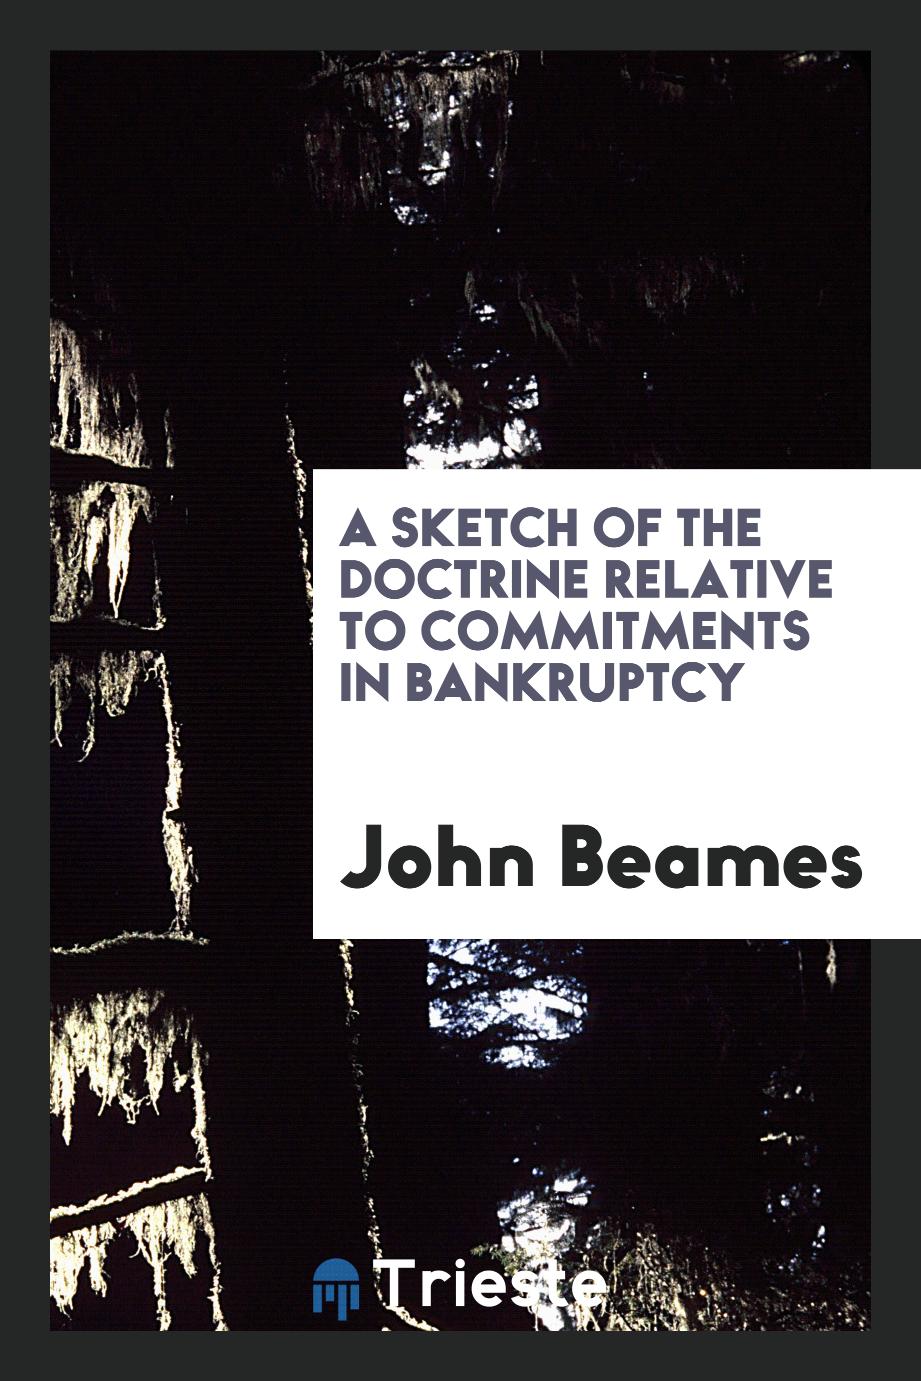 A Sketch of the Doctrine Relative to Commitments in Bankruptcy